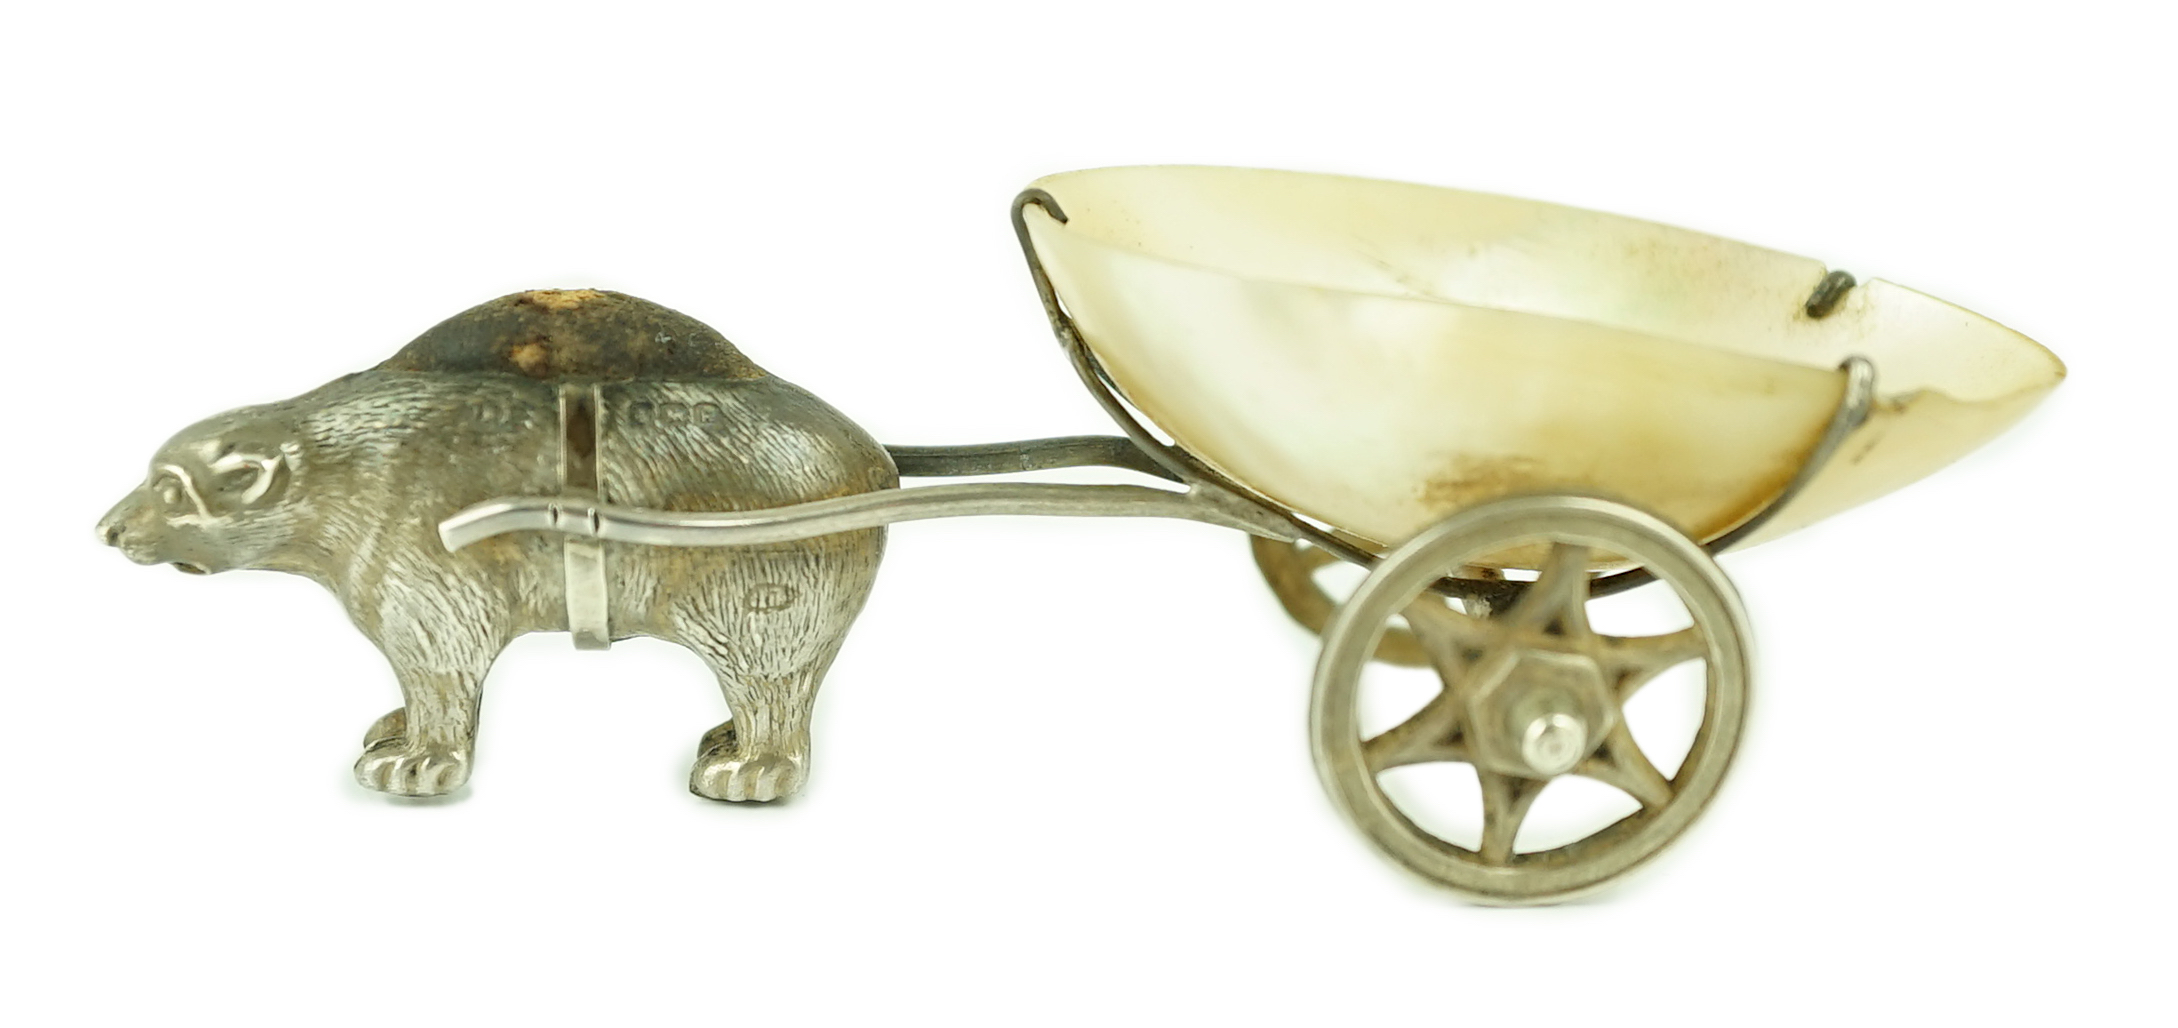 An Edwardian novelty silver and mother of pearl pin cushion, modelled as a bear pulling a cart, Adie & Lovekin Ltd